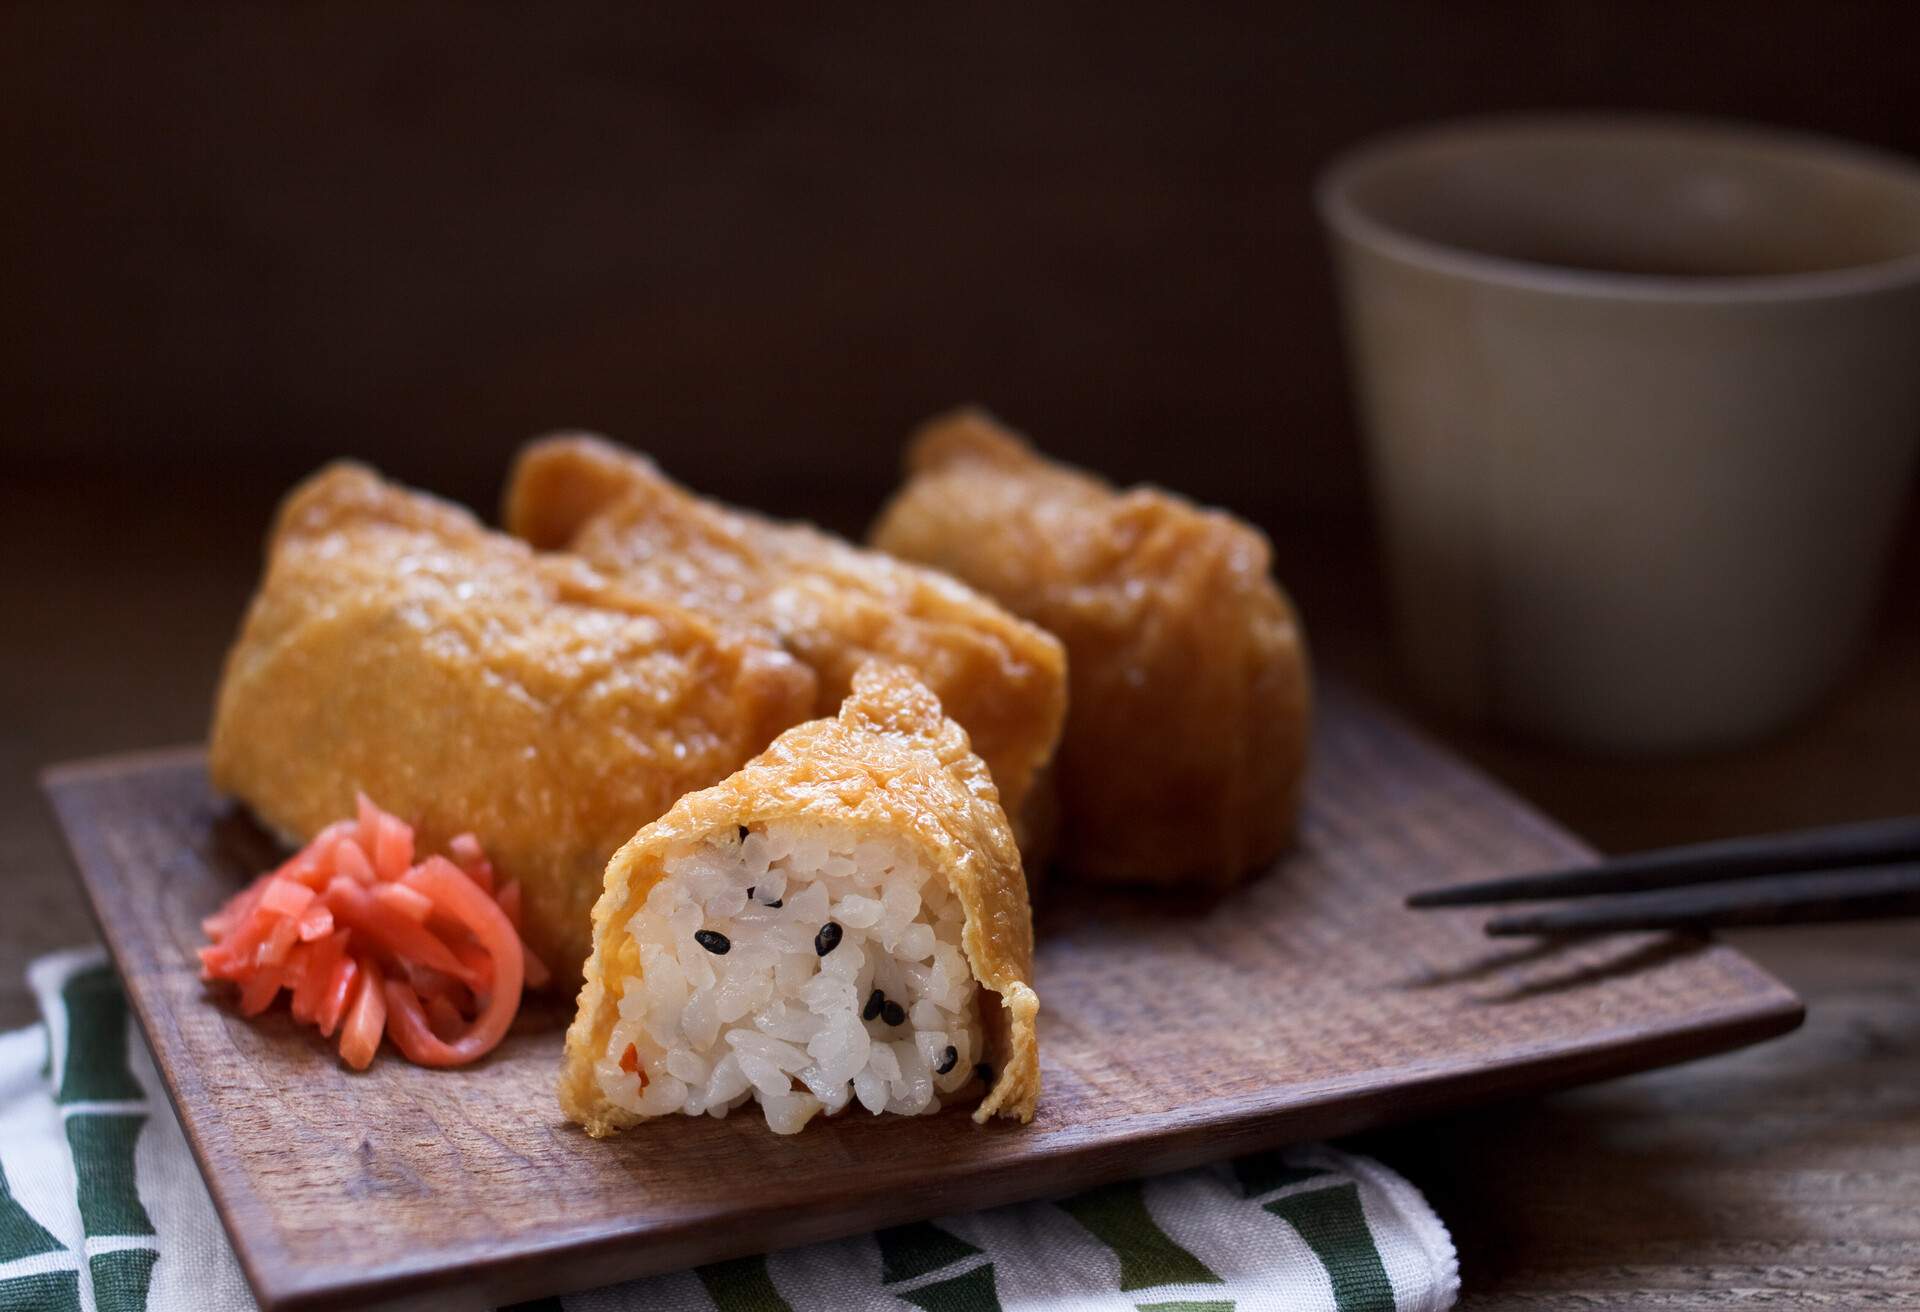 Sushi rice wrapped in fried Tofu (bean curd).